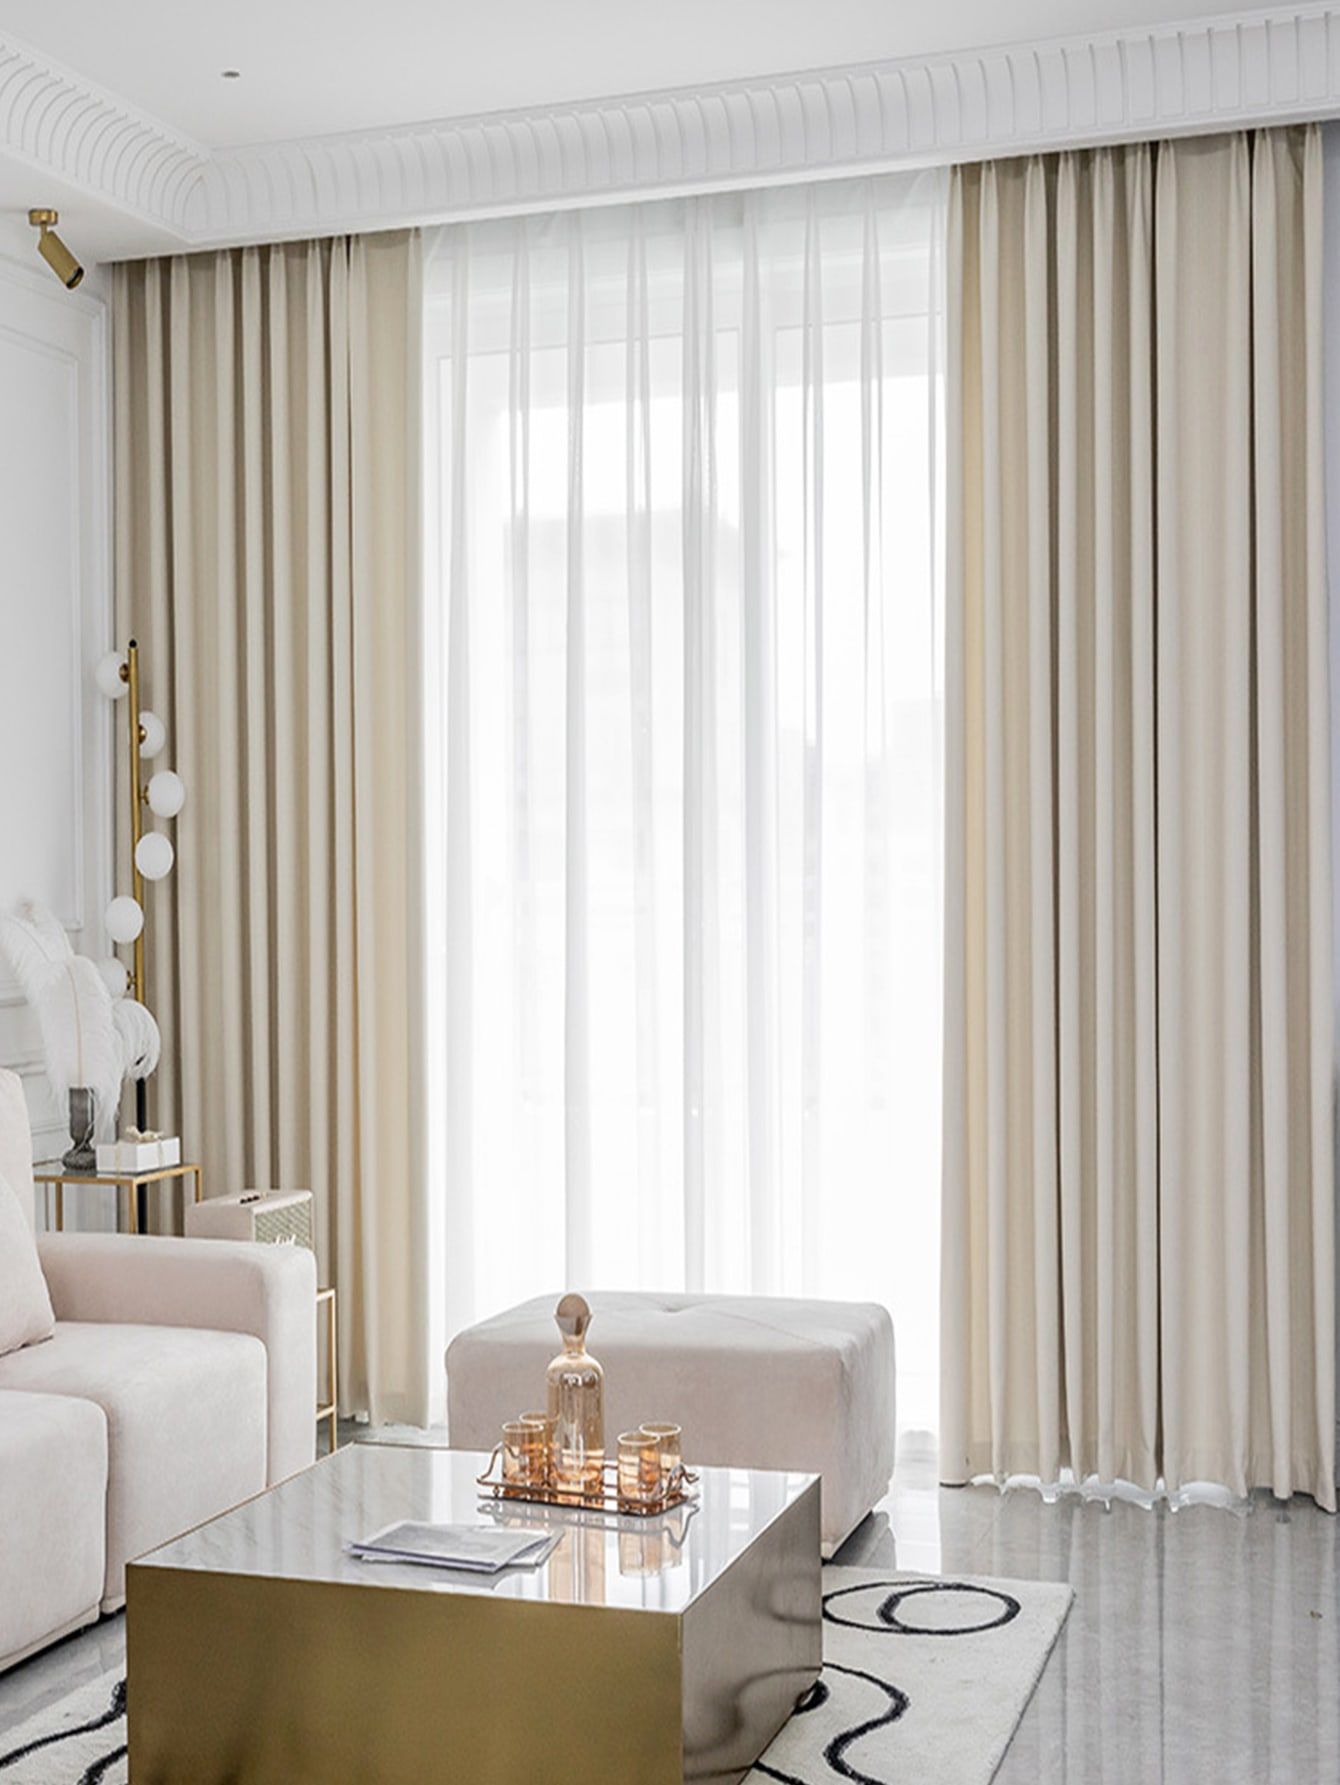 Blackout Curtains: Creating Serene Spaces with Light Control